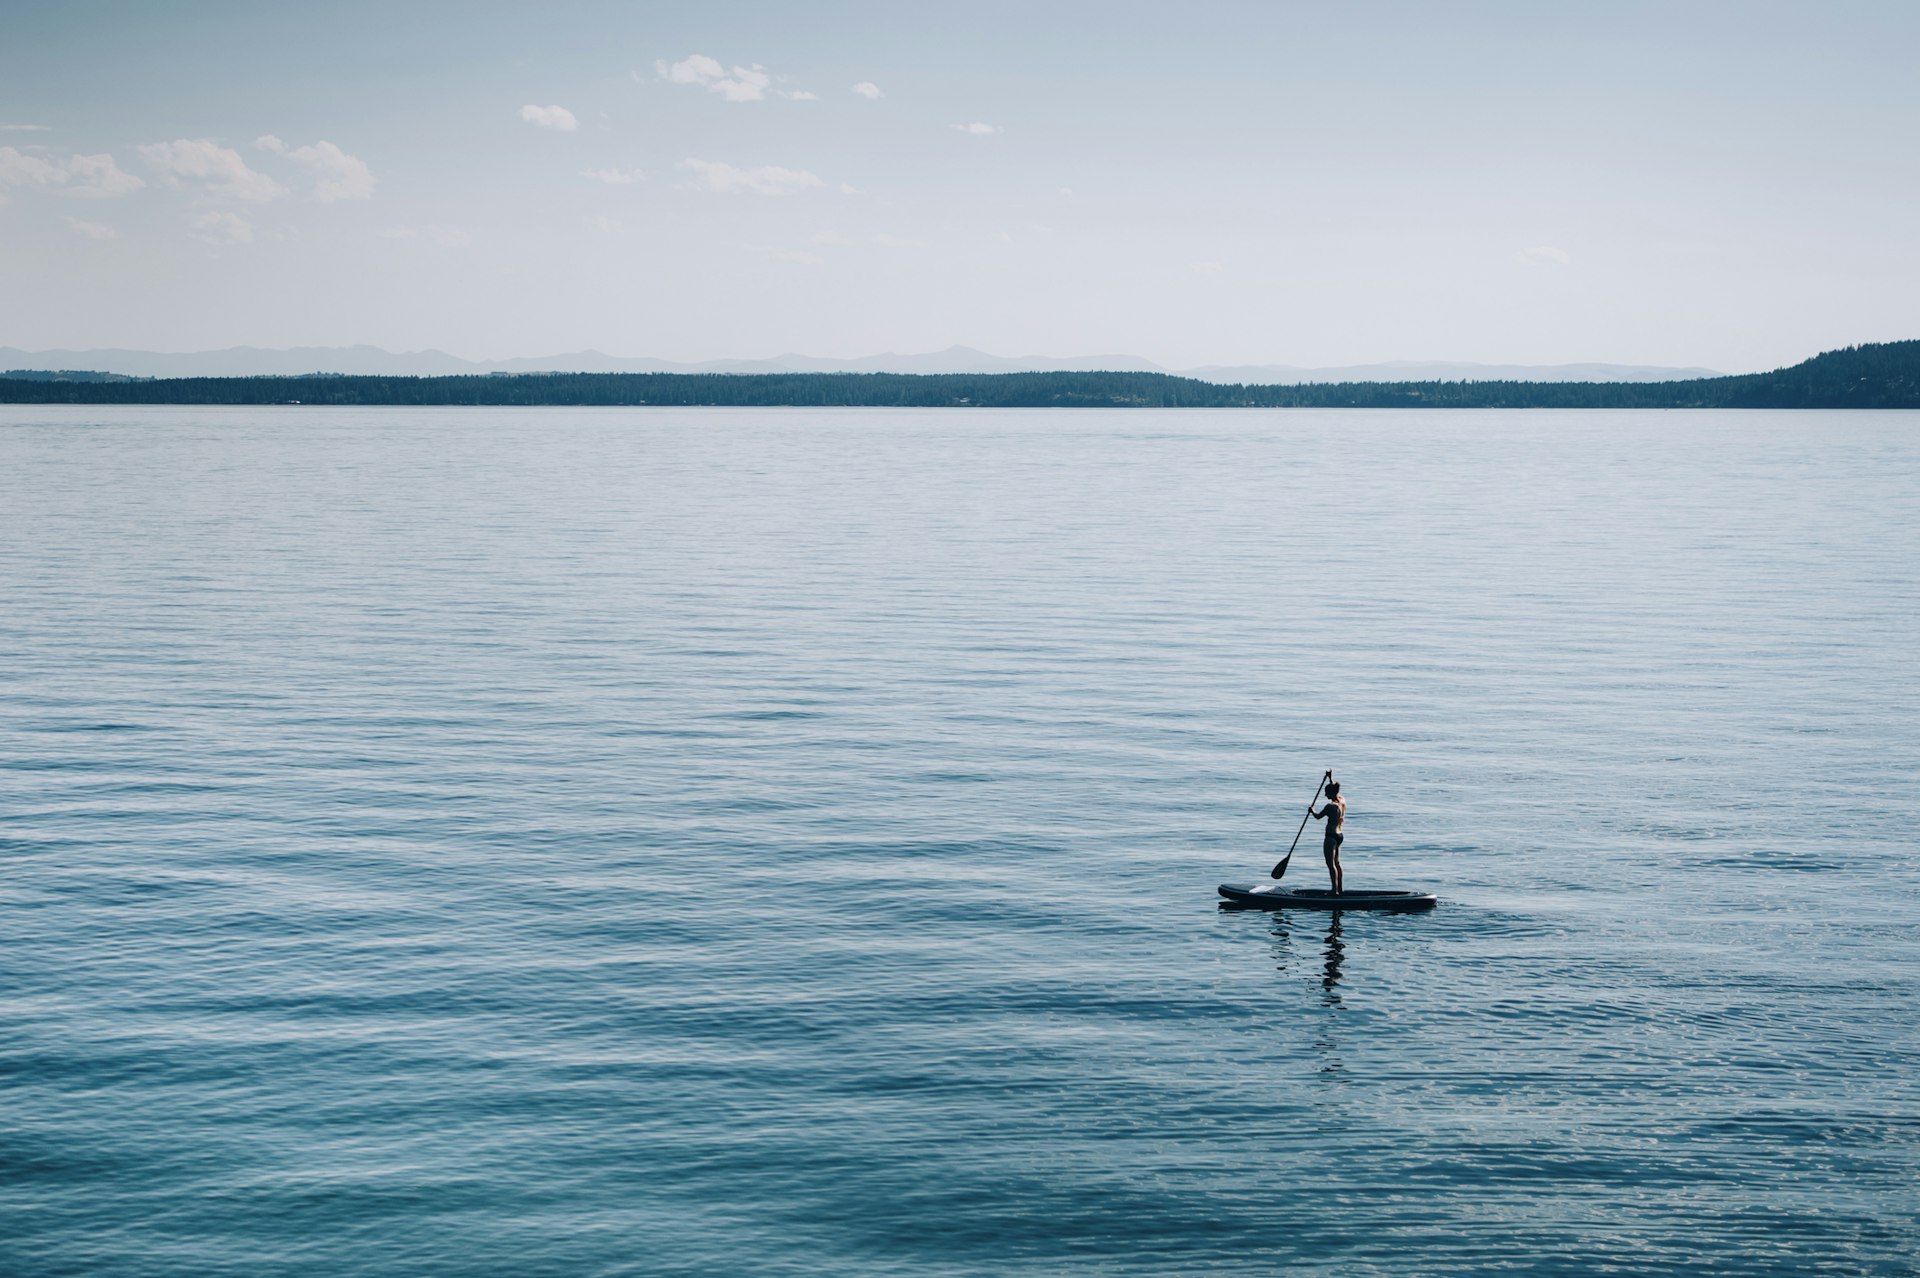 A solo figure stands on a paddleboard on an incredibly still lake surface